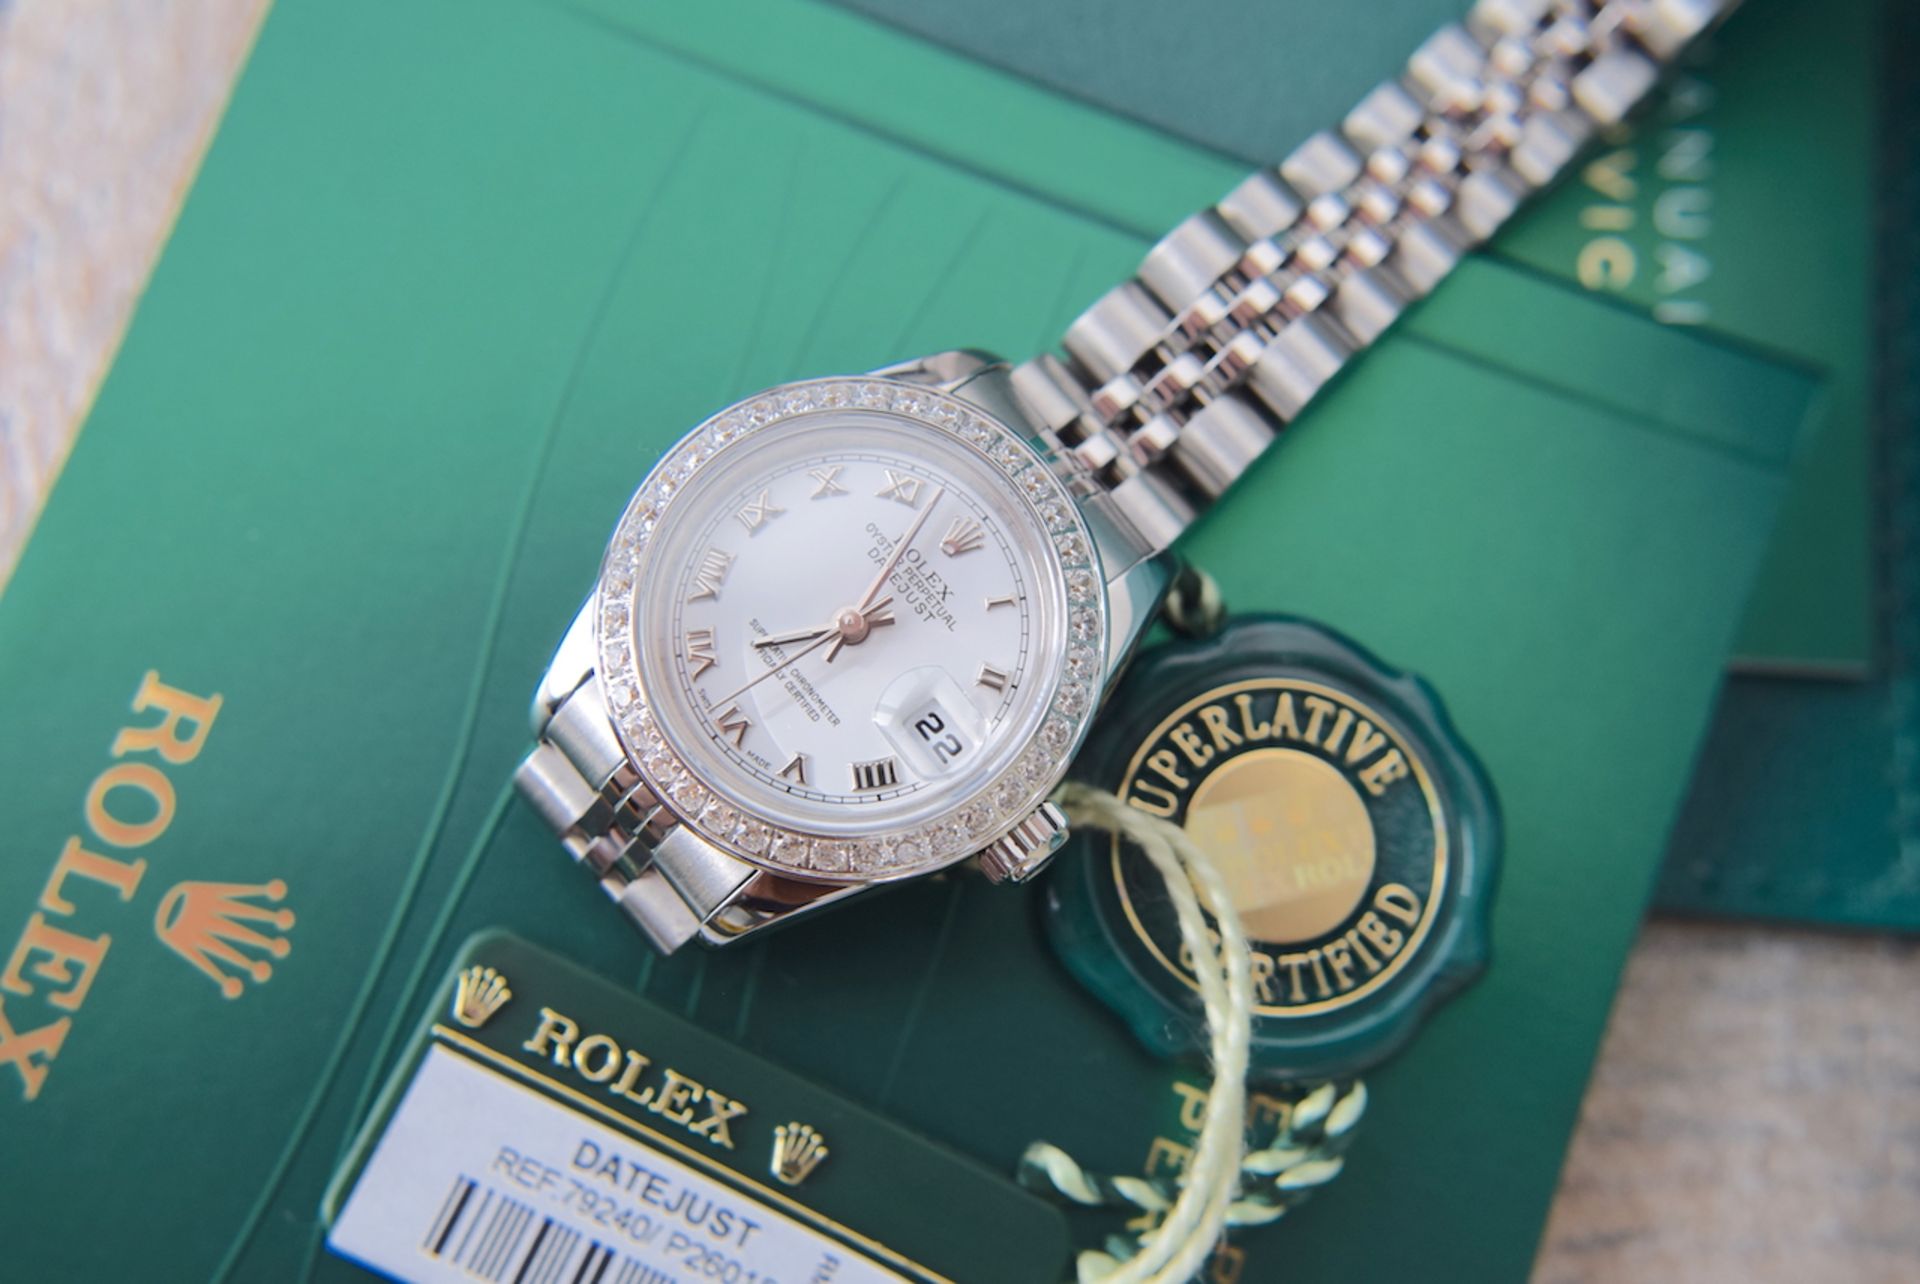 ROLEX Oyster Perpetual 'Datejust' - Stainless Steel/ White Roman Numerals - Image 3 of 15